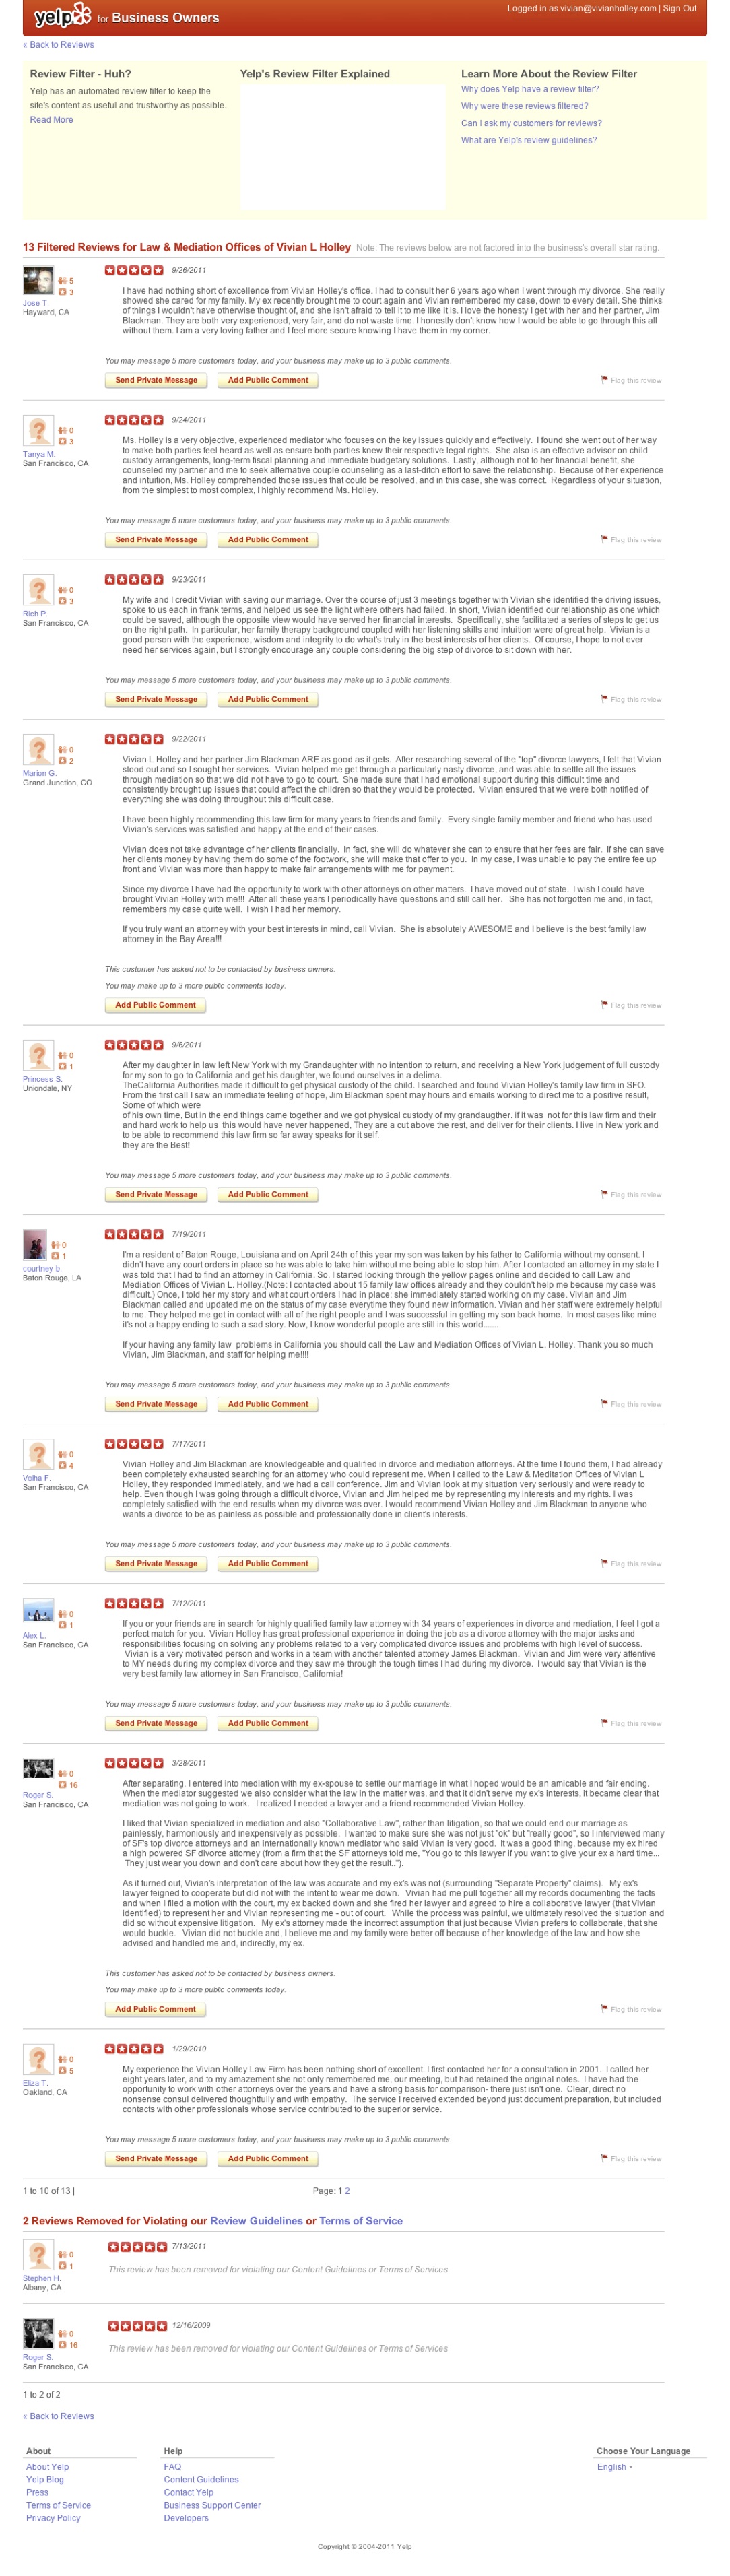 Yelp Reviews as of 10-6-11